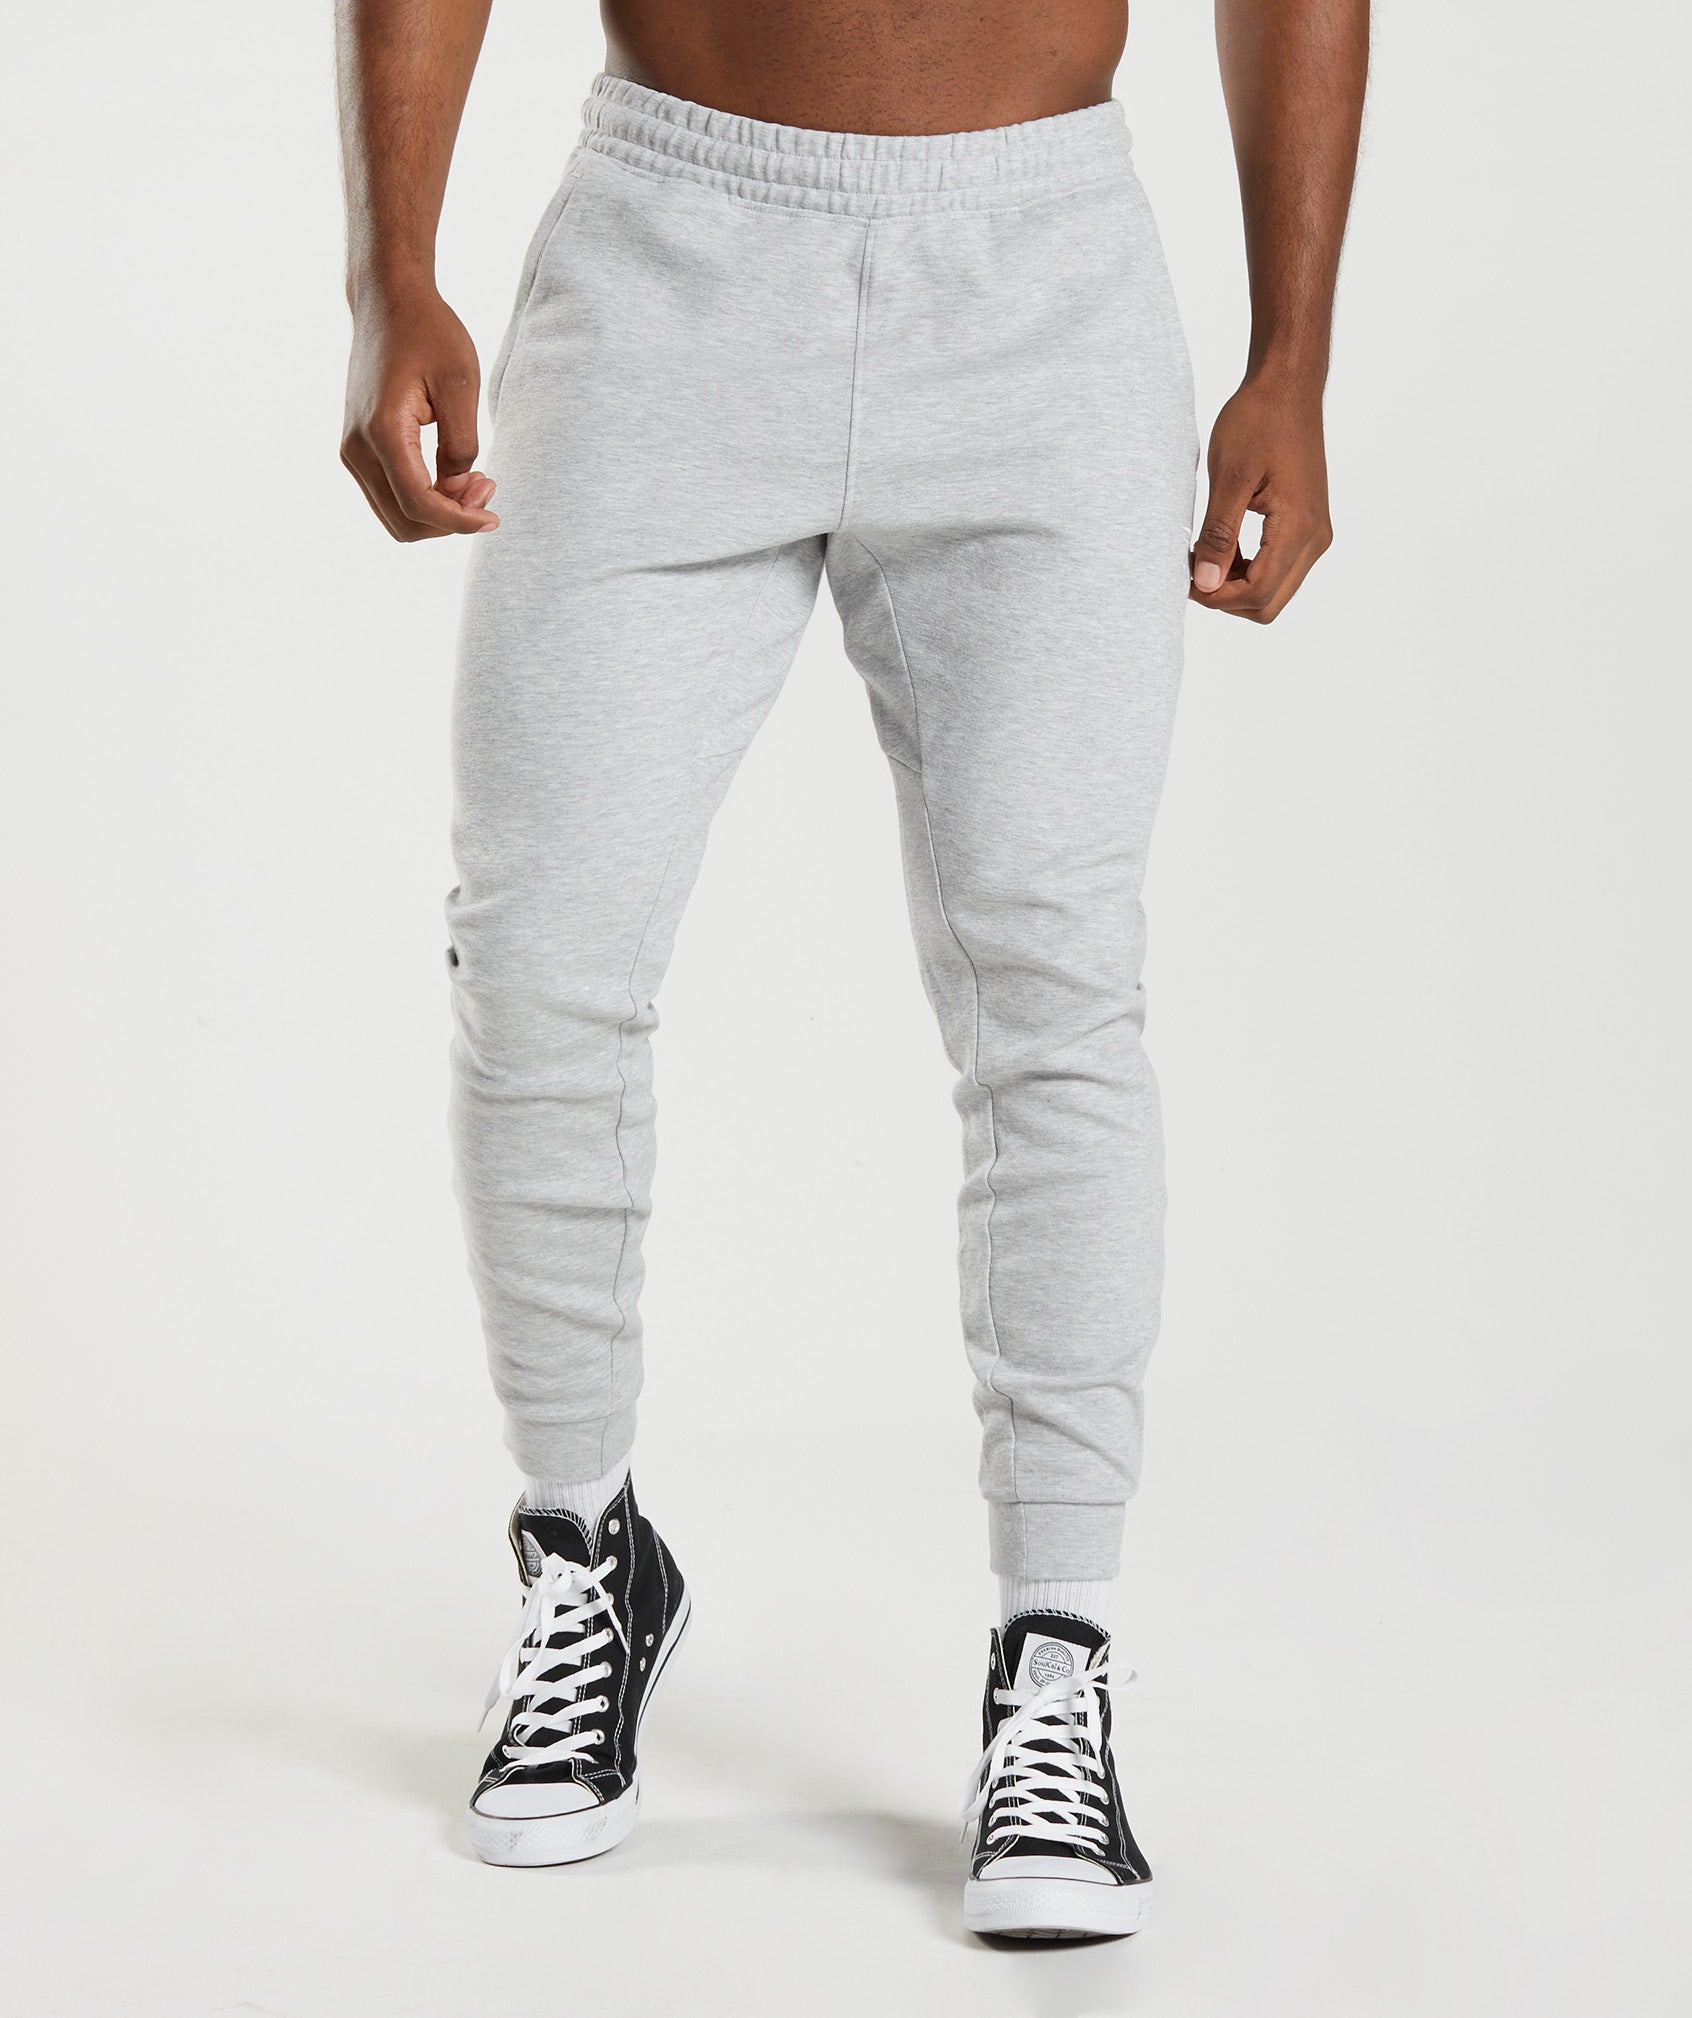  Cathalem Grey Sweatpants Men Men's Sweatpants with Zipper  Pockets Open Bottom Athletic Pants for Jogging Workout Gym Running Training  sd3 : Sports & Outdoors